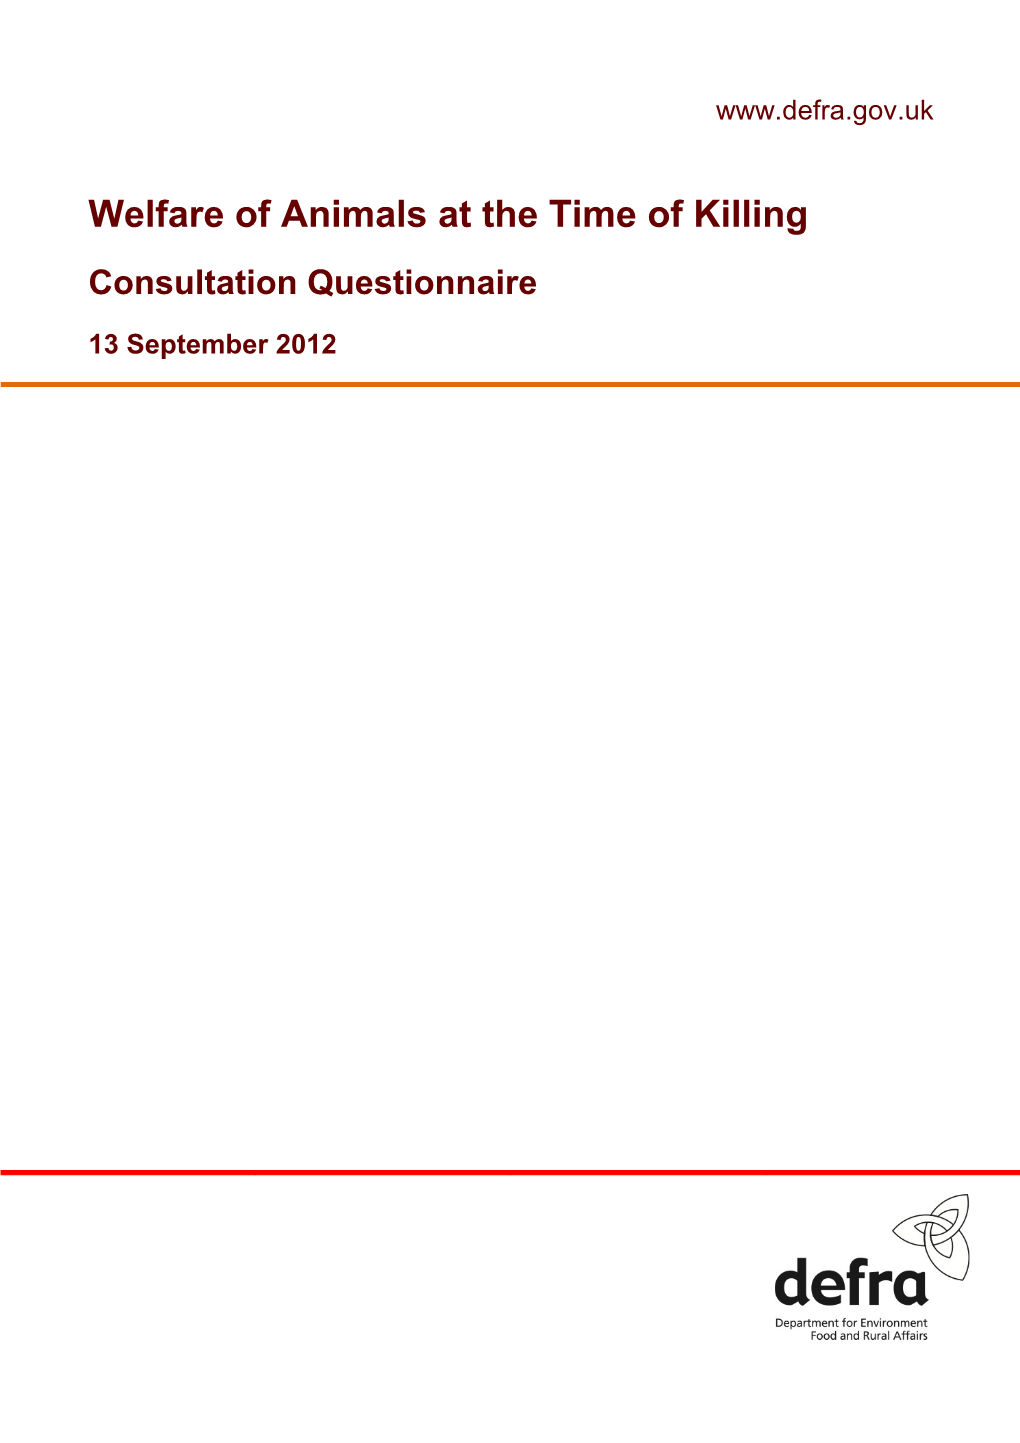 Welfare of Animals at the Time of Killing - Consultation Questionnaire